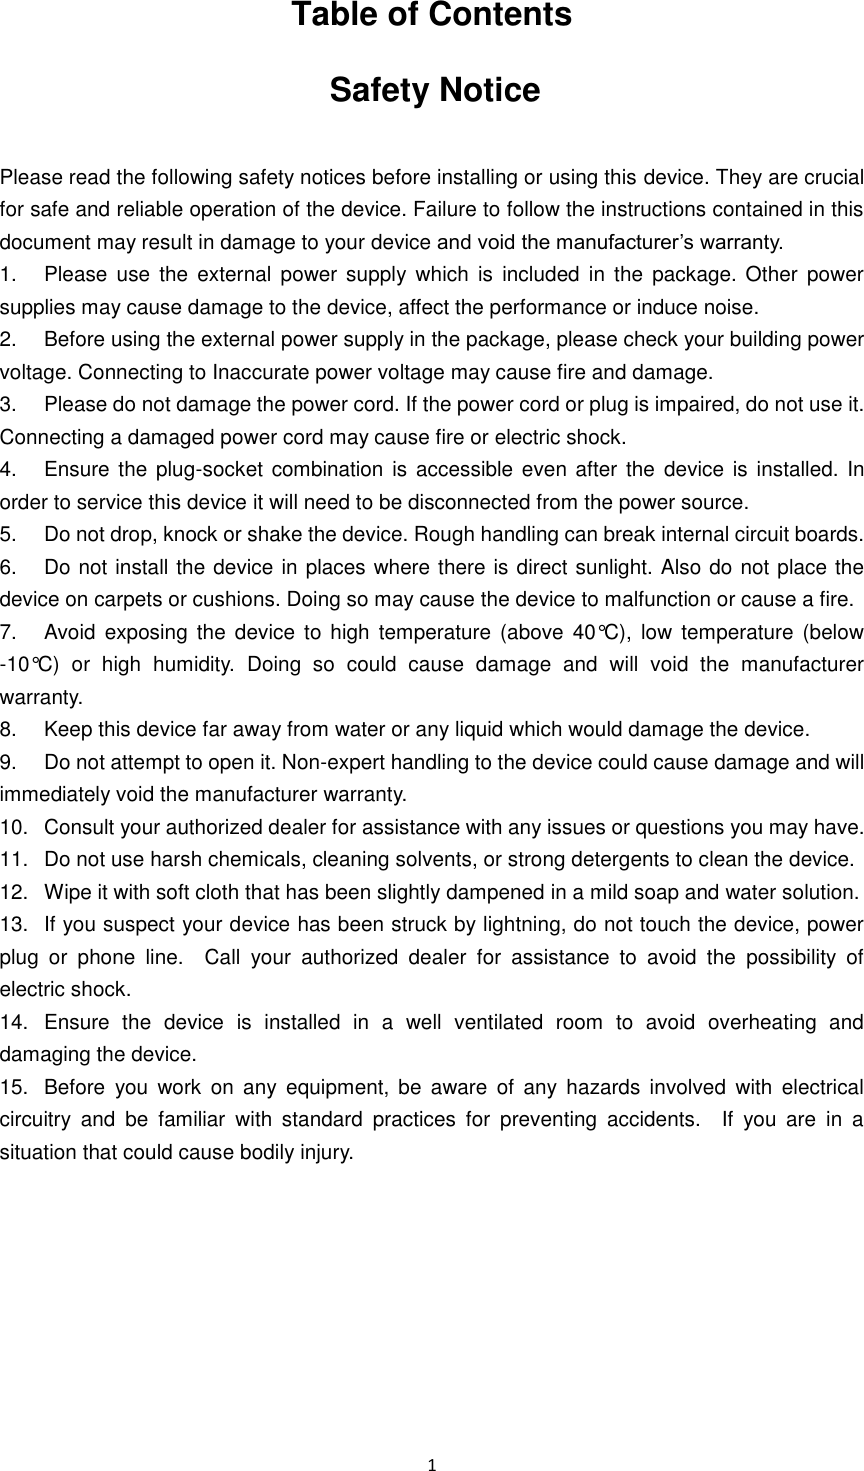  1   Table of Contents Safety Notice  Please read the following safety notices before installing or using this device. They are crucial for safe and reliable operation of the device. Failure to follow the instructions contained in this document may result in damage to your device and void the manufacturer’s warranty. 1.  Please  use  the  external  power  supply which  is  included  in  the  package. Other  power       supplies may cause damage to the device, affect the performance or induce noise. 2.  Before using the external power supply in the package, please check your building power voltage. Connecting to Inaccurate power voltage may cause fire and damage. 3.  Please do not damage the power cord. If the power cord or plug is impaired, do not use it.   Connecting a damaged power cord may cause fire or electric shock. 4.  Ensure the plug-socket  combination is accessible even after the  device is  installed.  In order to service this device it will need to be disconnected from the power source. 5.  Do not drop, knock or shake the device. Rough handling can break internal circuit boards. 6.  Do not install the device in places where there is direct sunlight. Also do not place the device on carpets or cushions. Doing so may cause the device to malfunction or cause a fire. 7.  Avoid exposing  the  device to high  temperature (above  40°C),  low  temperature  (below -10°C)  or  high  humidity.  Doing  so  could  cause  damage  and  will  void  the  manufacturer warranty. 8.  Keep this device far away from water or any liquid which would damage the device. 9.  Do not attempt to open it. Non-expert handling to the device could cause damage and will immediately void the manufacturer warranty.   10.  Consult your authorized dealer for assistance with any issues or questions you may have. 11.  Do not use harsh chemicals, cleaning solvents, or strong detergents to clean the device.   12.  Wipe it with soft cloth that has been slightly dampened in a mild soap and water solution. 13.  If you suspect your device has been struck by lightning, do not touch the device, power plug  or  phone  line.    Call  your  authorized  dealer  for  assistance  to  avoid  the  possibility  of electric shock. 14.  Ensure  the  device  is  installed  in  a  well  ventilated  room  to  avoid  overheating  and damaging the device. 15.  Before  you  work  on  any  equipment,  be  aware  of  any  hazards  involved  with  electrical circuitry  and  be  familiar  with  standard  practices  for  preventing  accidents.    If  you  are  in  a situation that could cause bodily injury.        